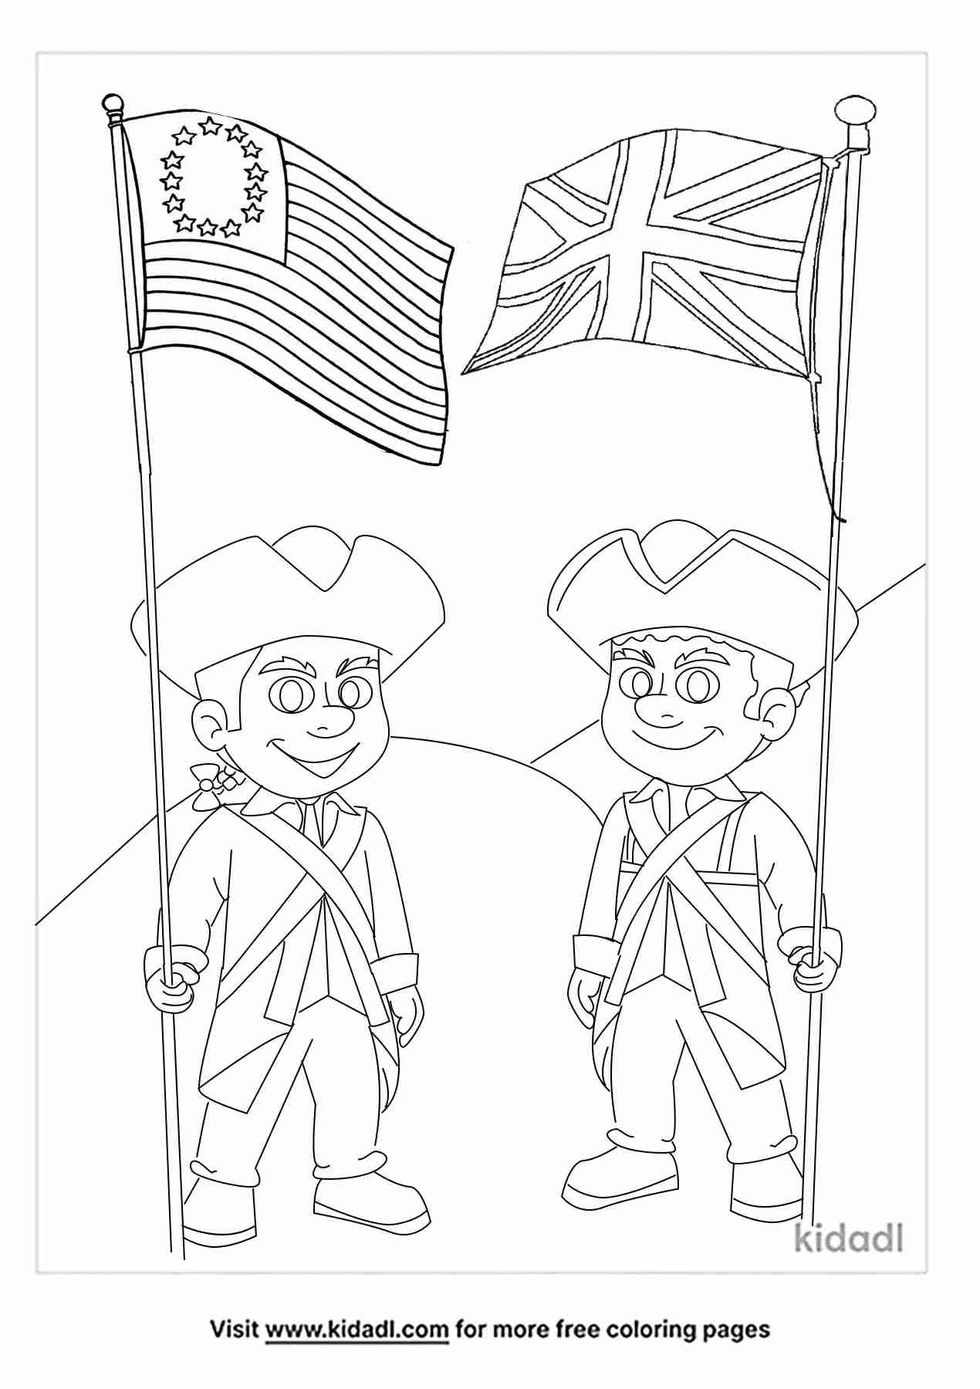 Battle Of Bunker Hill Coloring Page